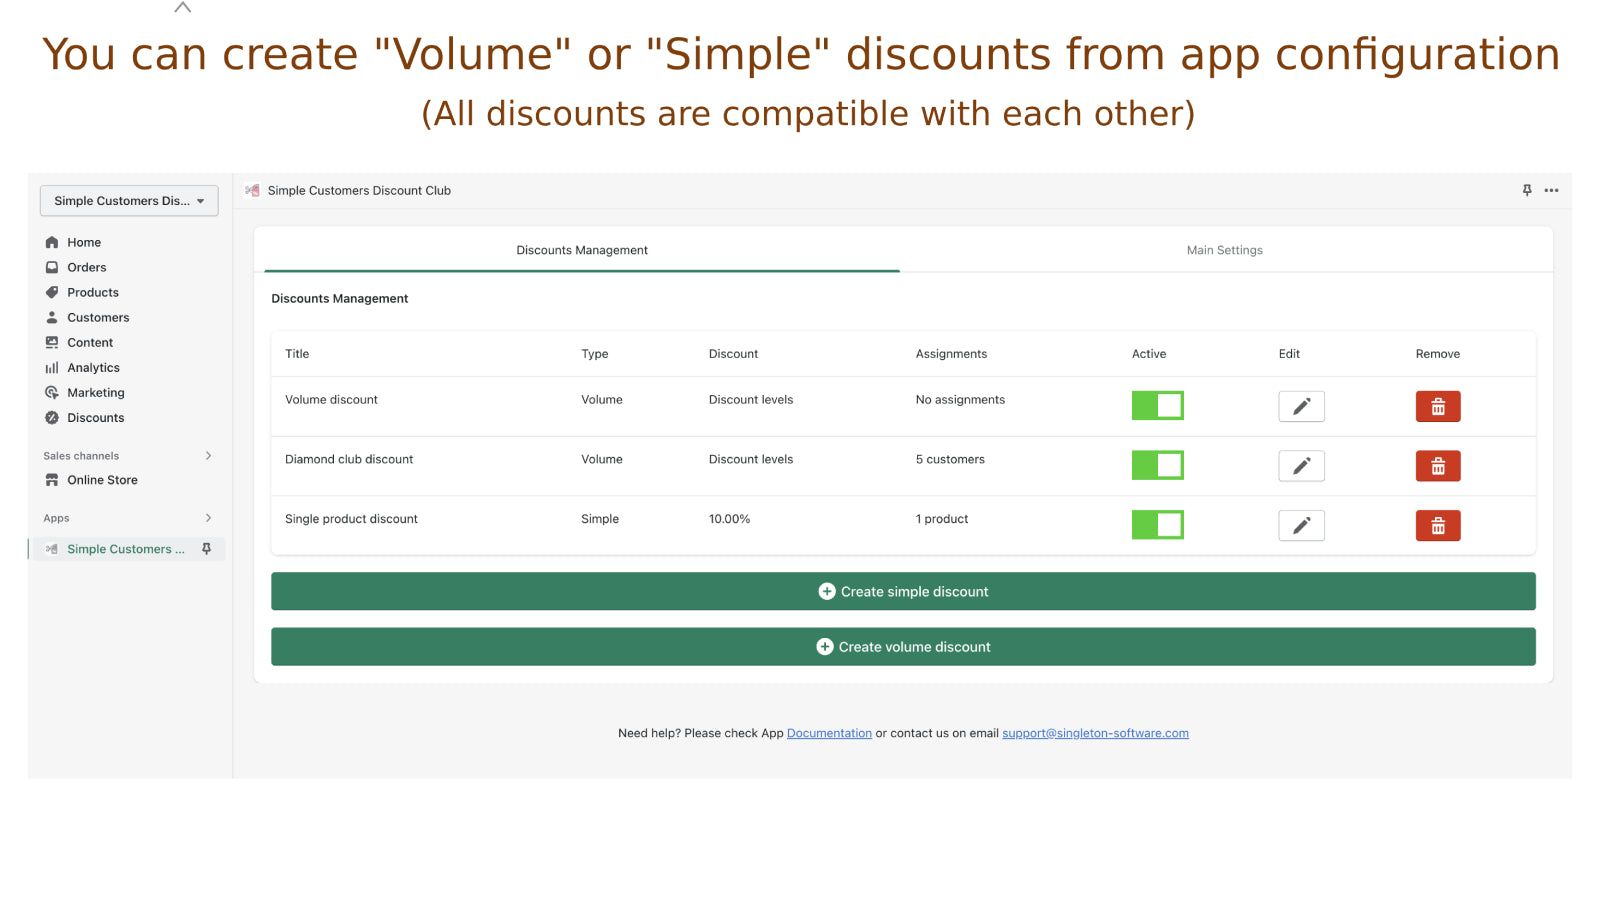 Create volume discounts, or simple discounts